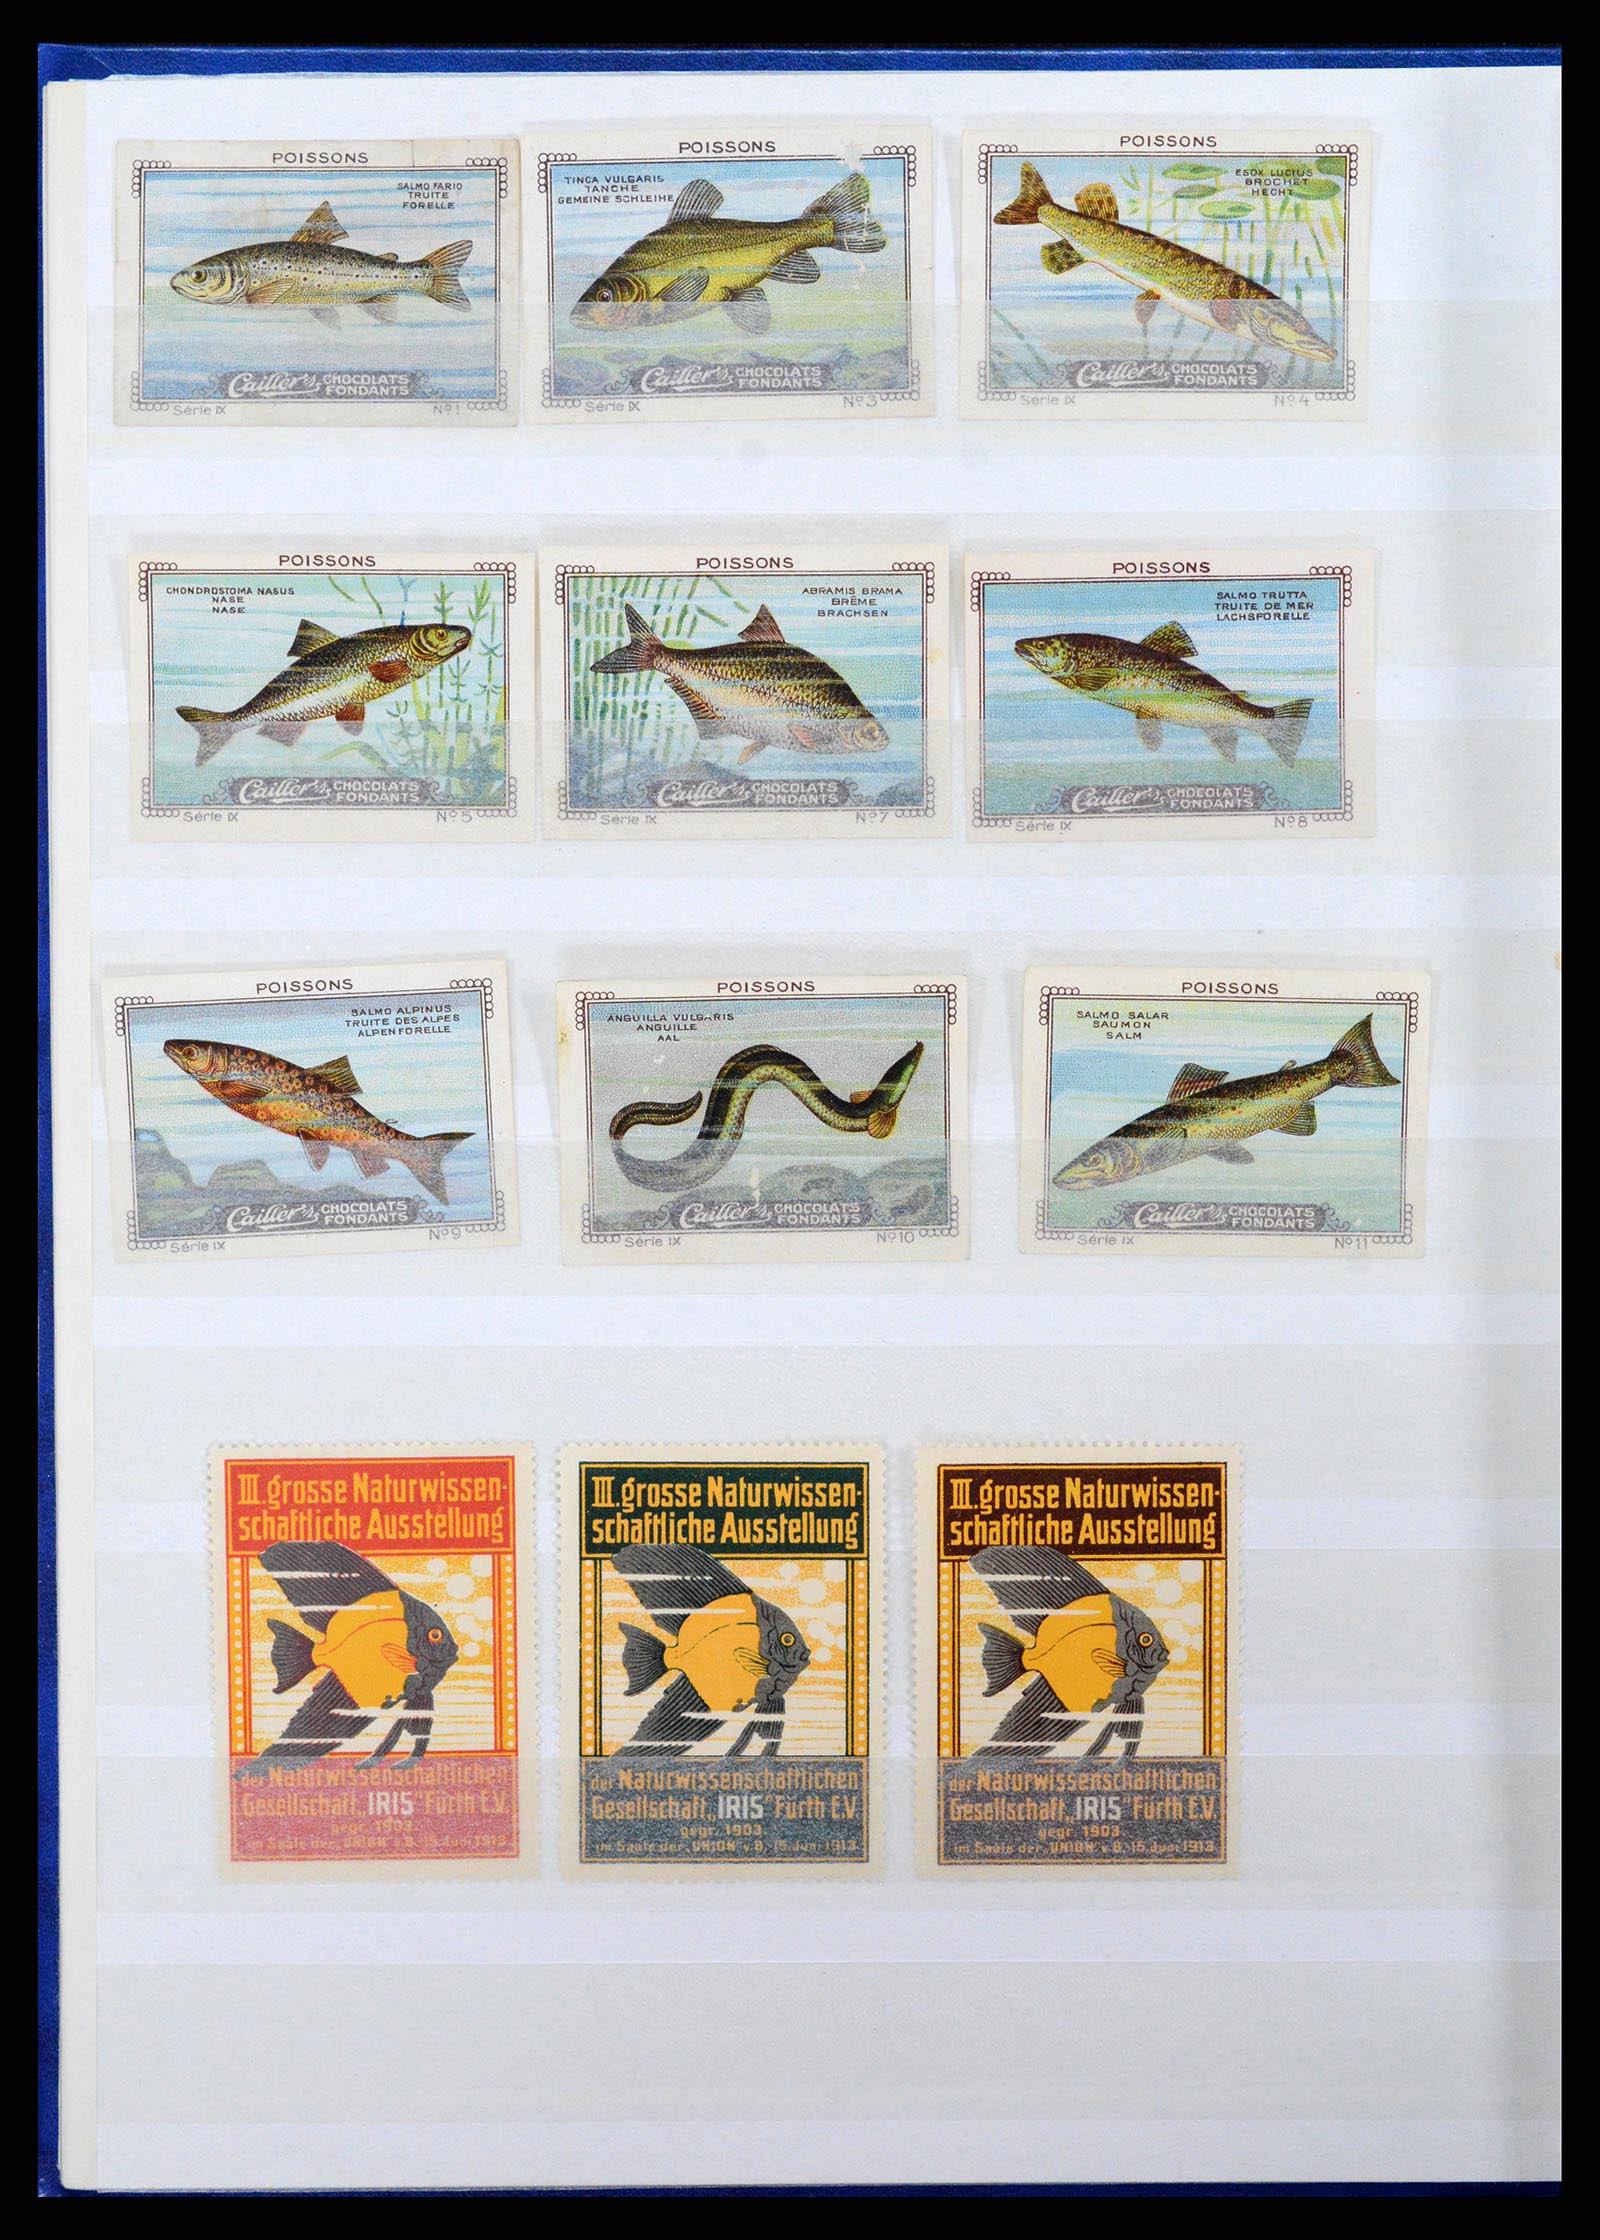 37465 022 - Stamp collection 37465 Thematics fishes and sealife till 2021!!